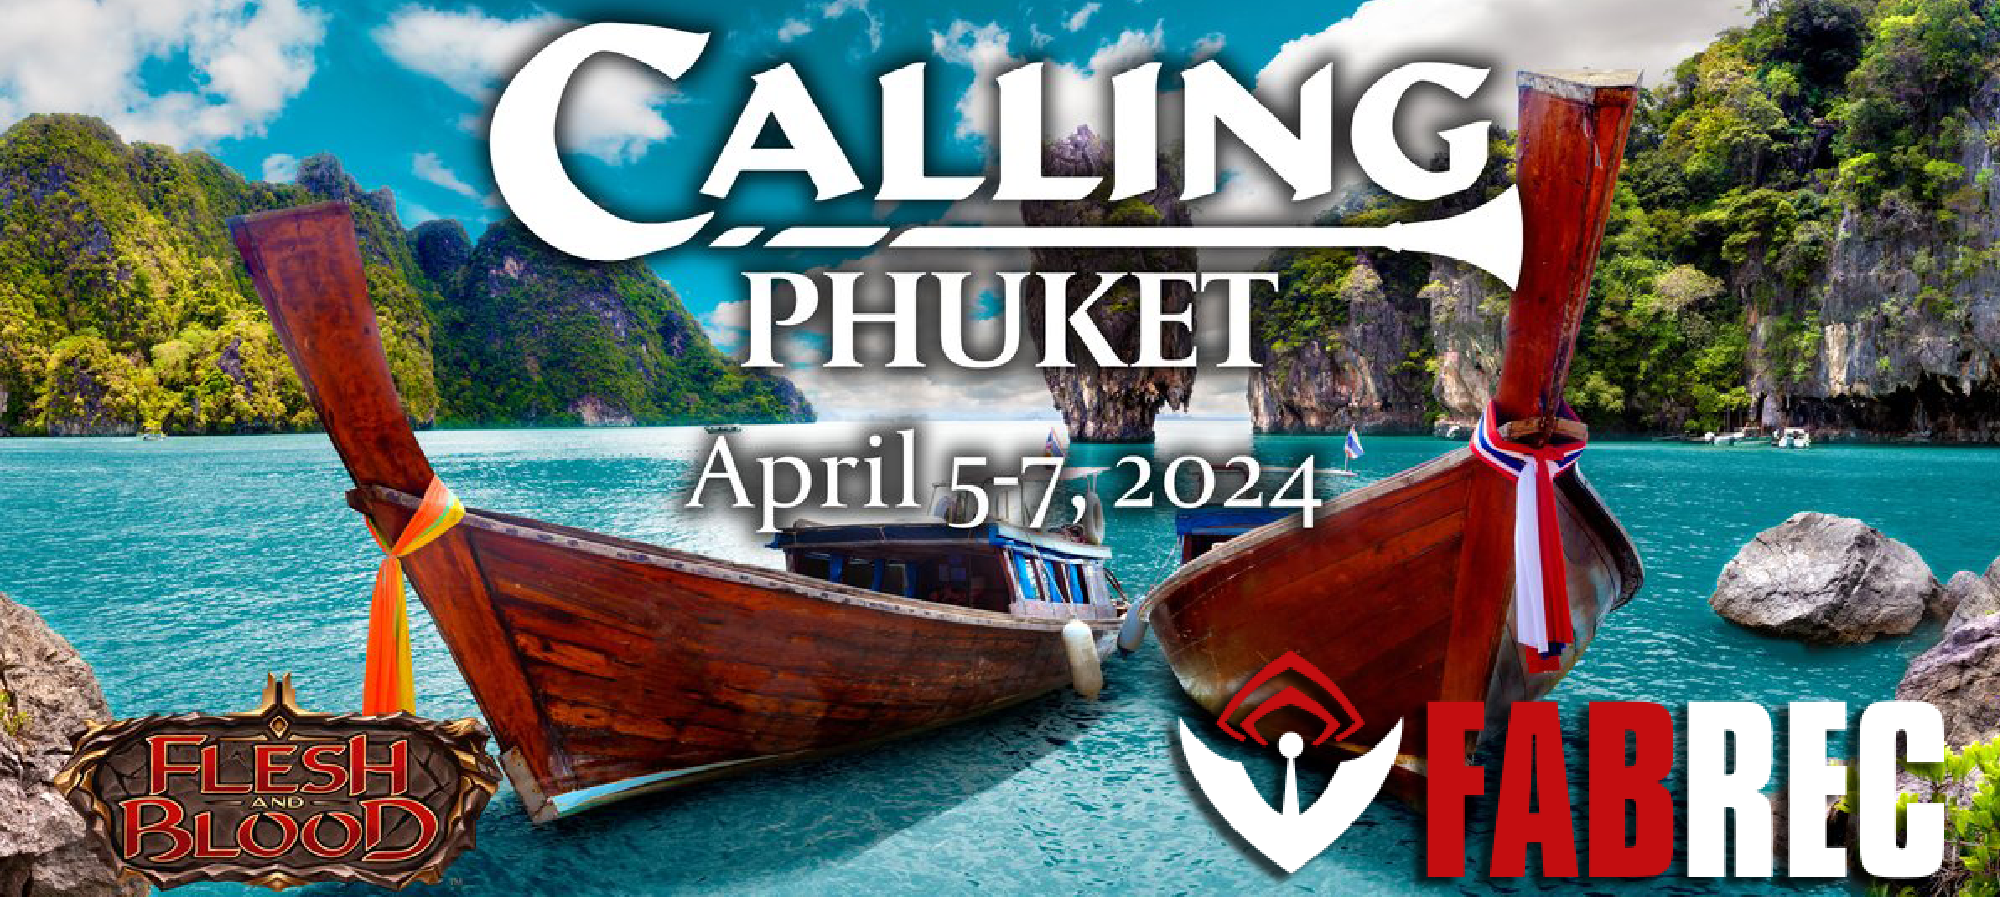 A Review of Calling: Phuket!